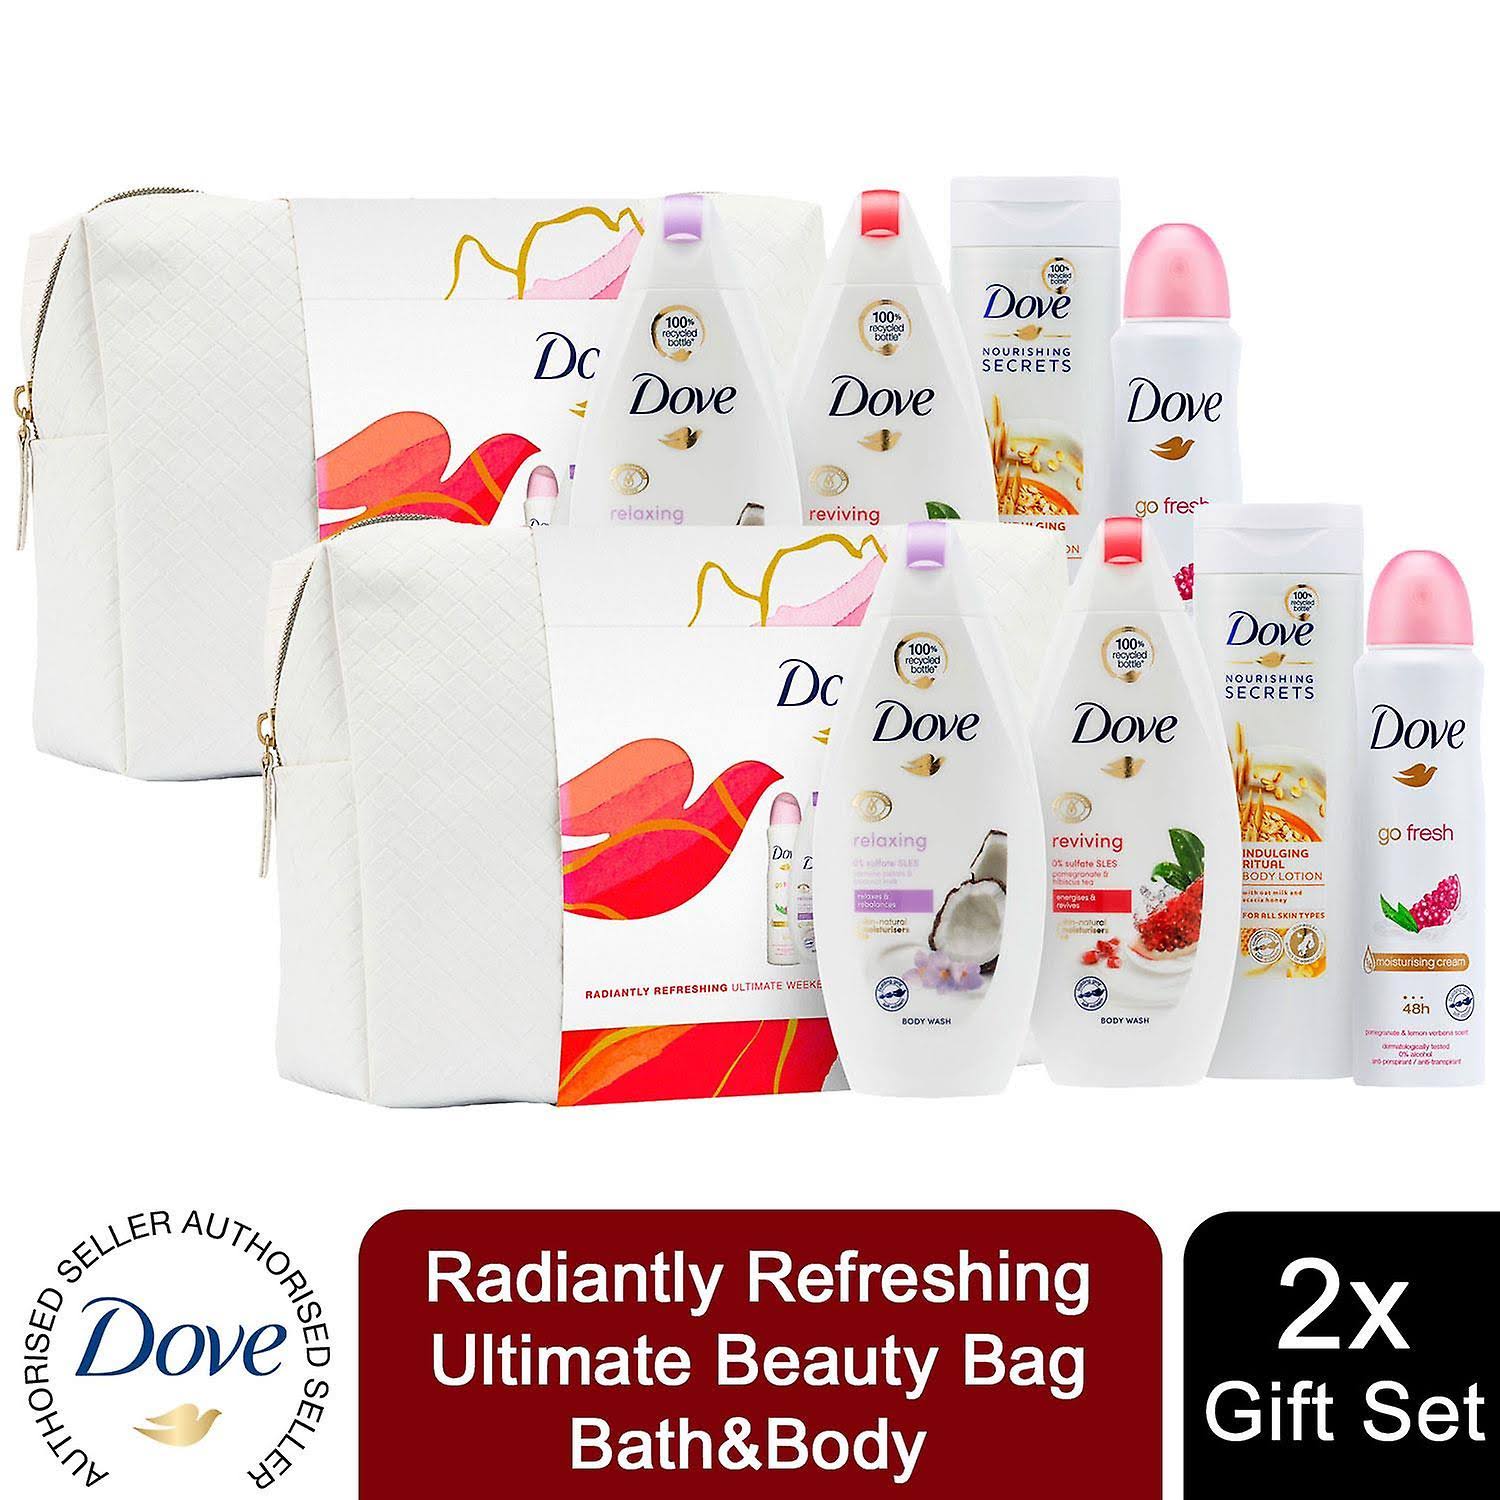 3x Dove Radiantly Refreshing Ultimate Beauty Bag Bath&Body 4pcs Gift Set For Her White